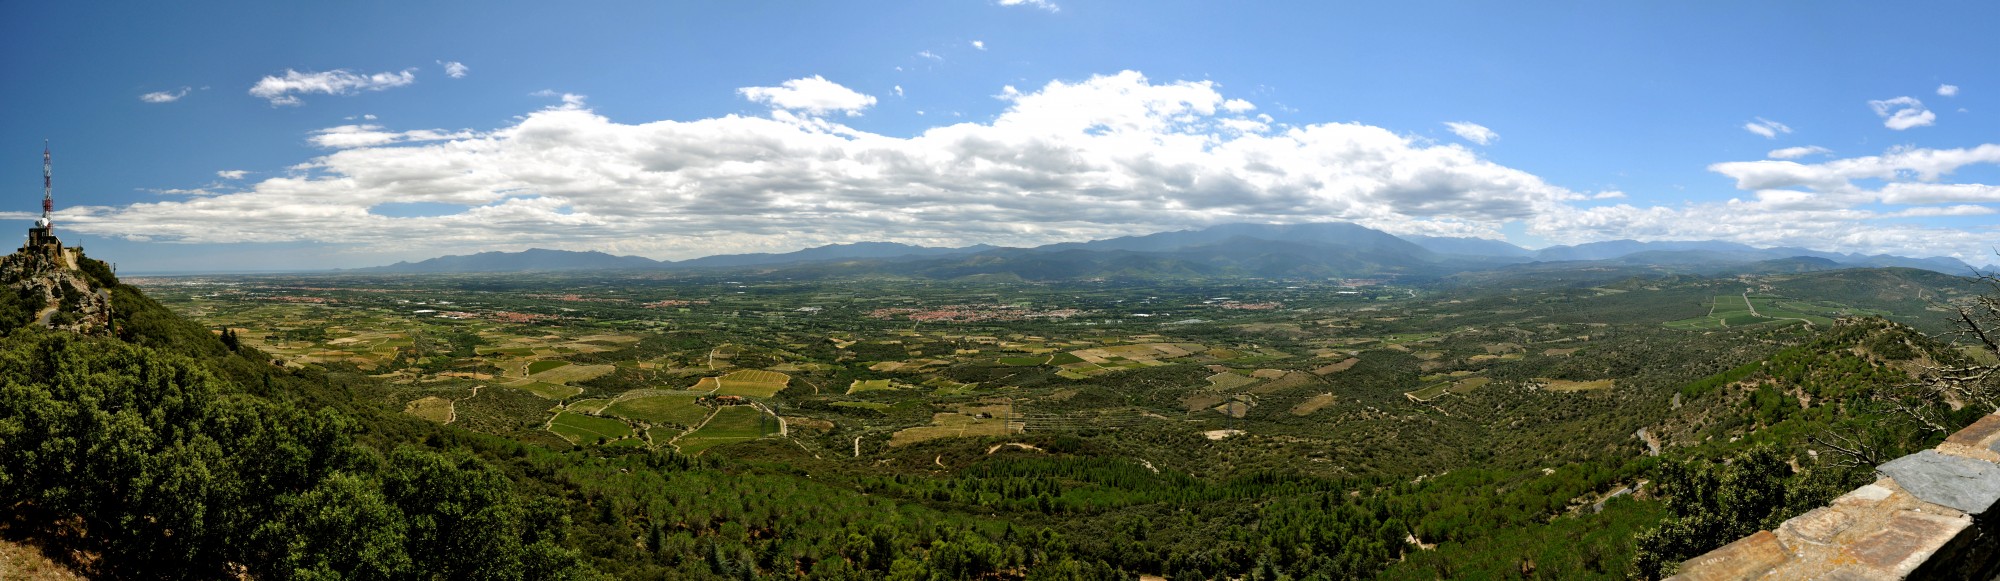 Panorama roussillon forca real